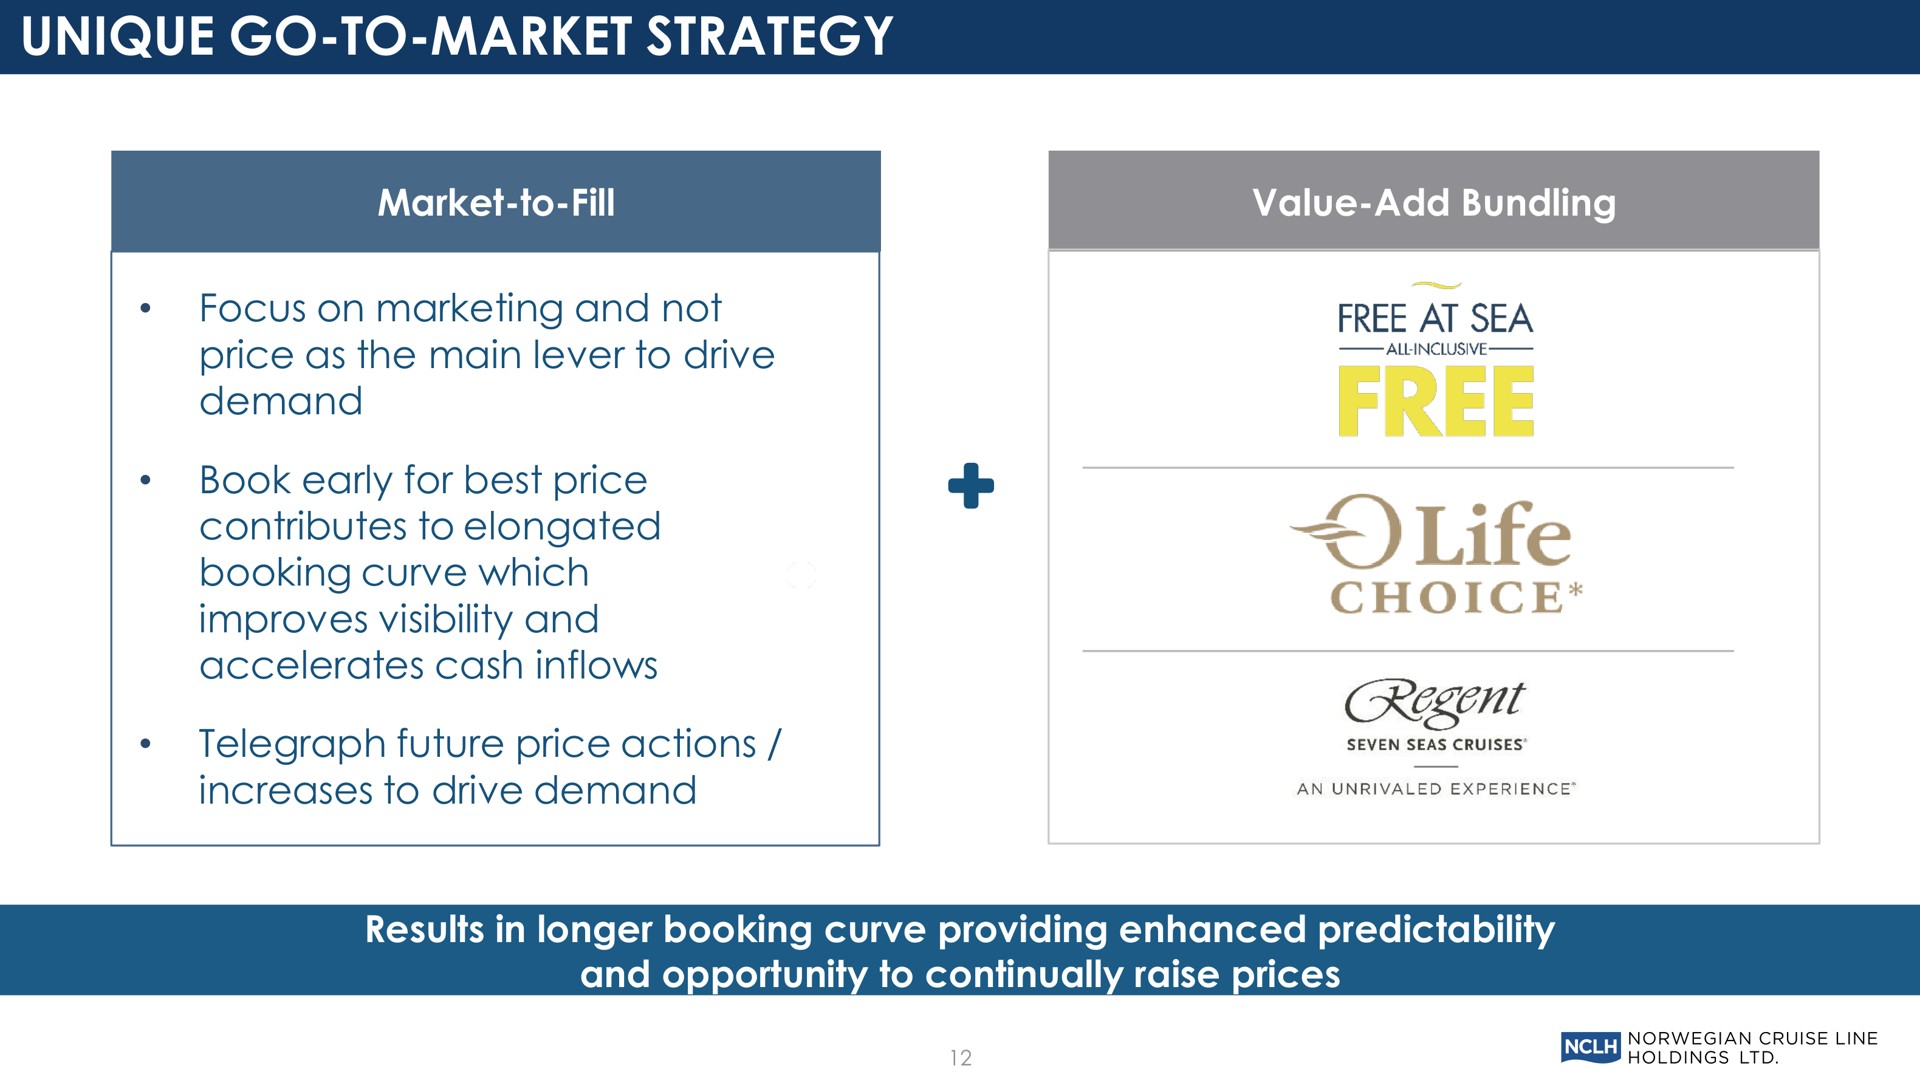 unique go to market strategy market to fill value add bundling focus on marketing and not price as the main lever to drive demand book early for best price contributes to elongated booking curve which improves visibility and accelerates cash inflows telegraph future price actions increases to drive demand results in longer booking curve providing enhanced predictability and opportunity to continually raise prices of free at sea life | Norwegian Cruise Line